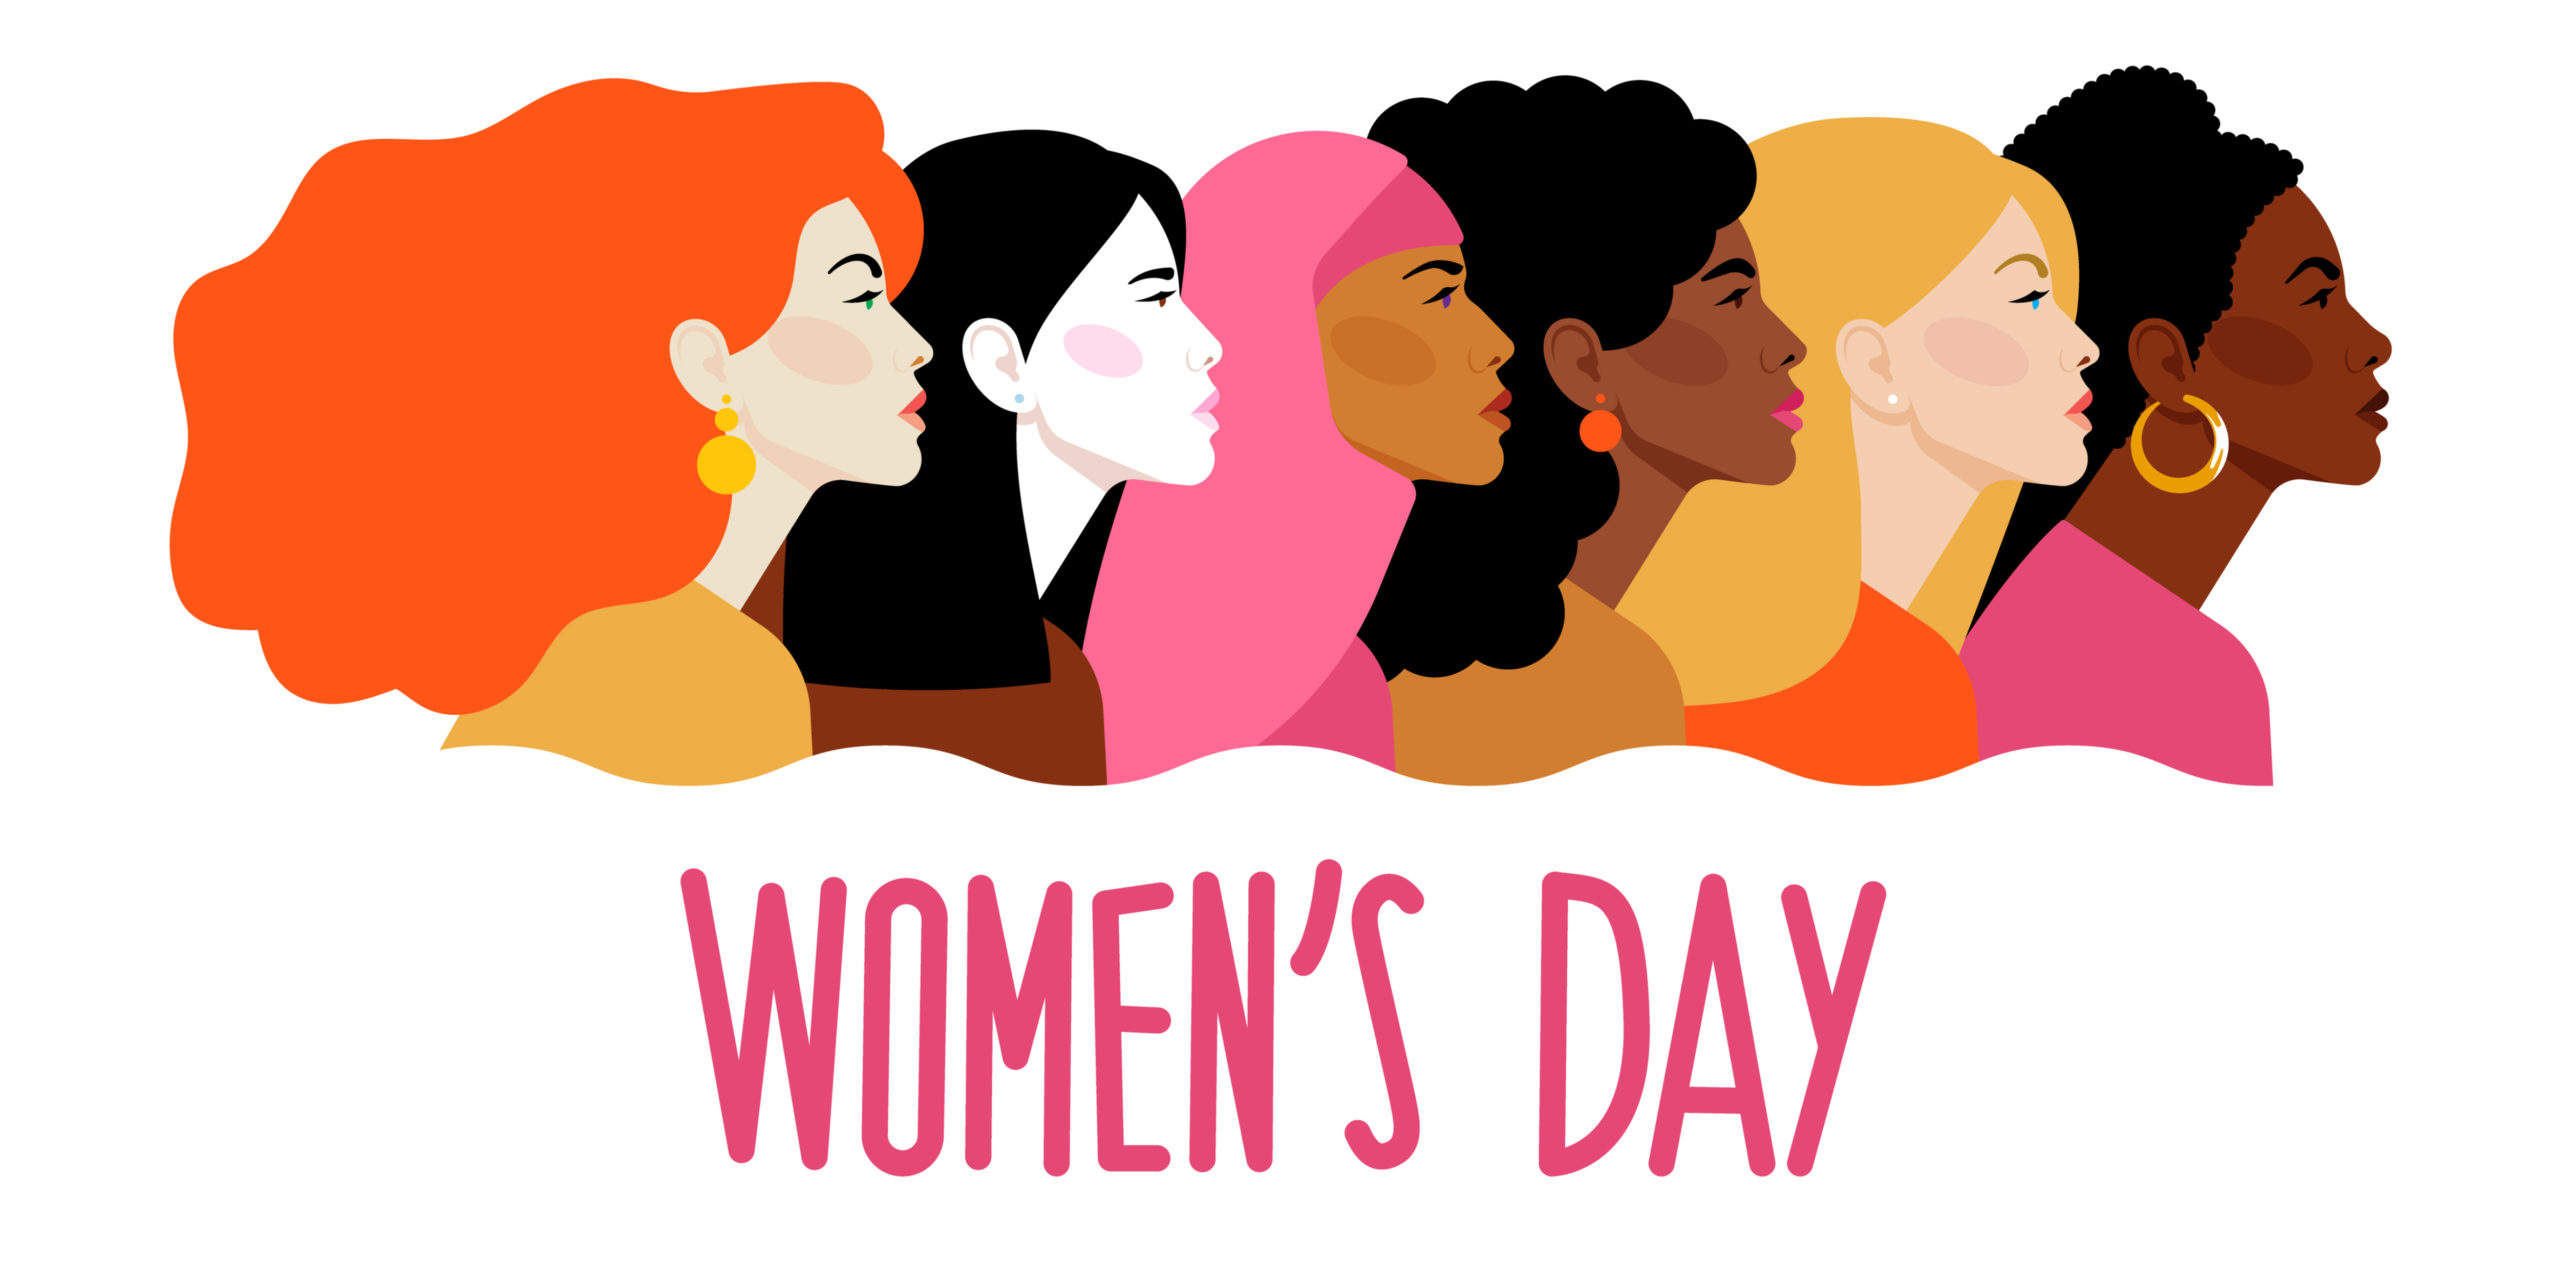 Women's day celebration by  Quest Global